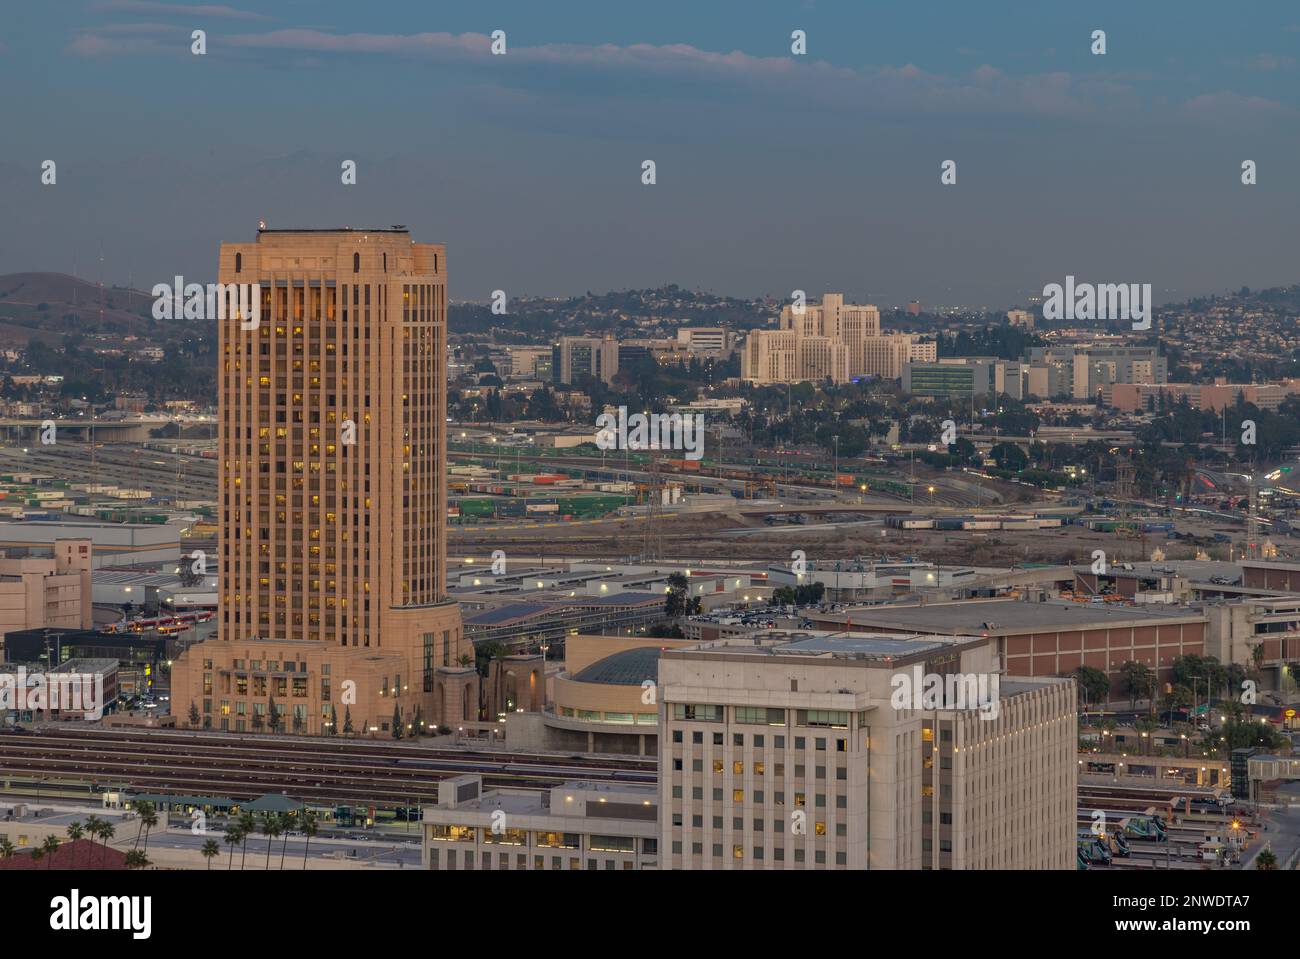 A picture of the Los Angeles Union Station at sunset, with the University of Southern California Health Sciences Campus in the background. Stock Photo